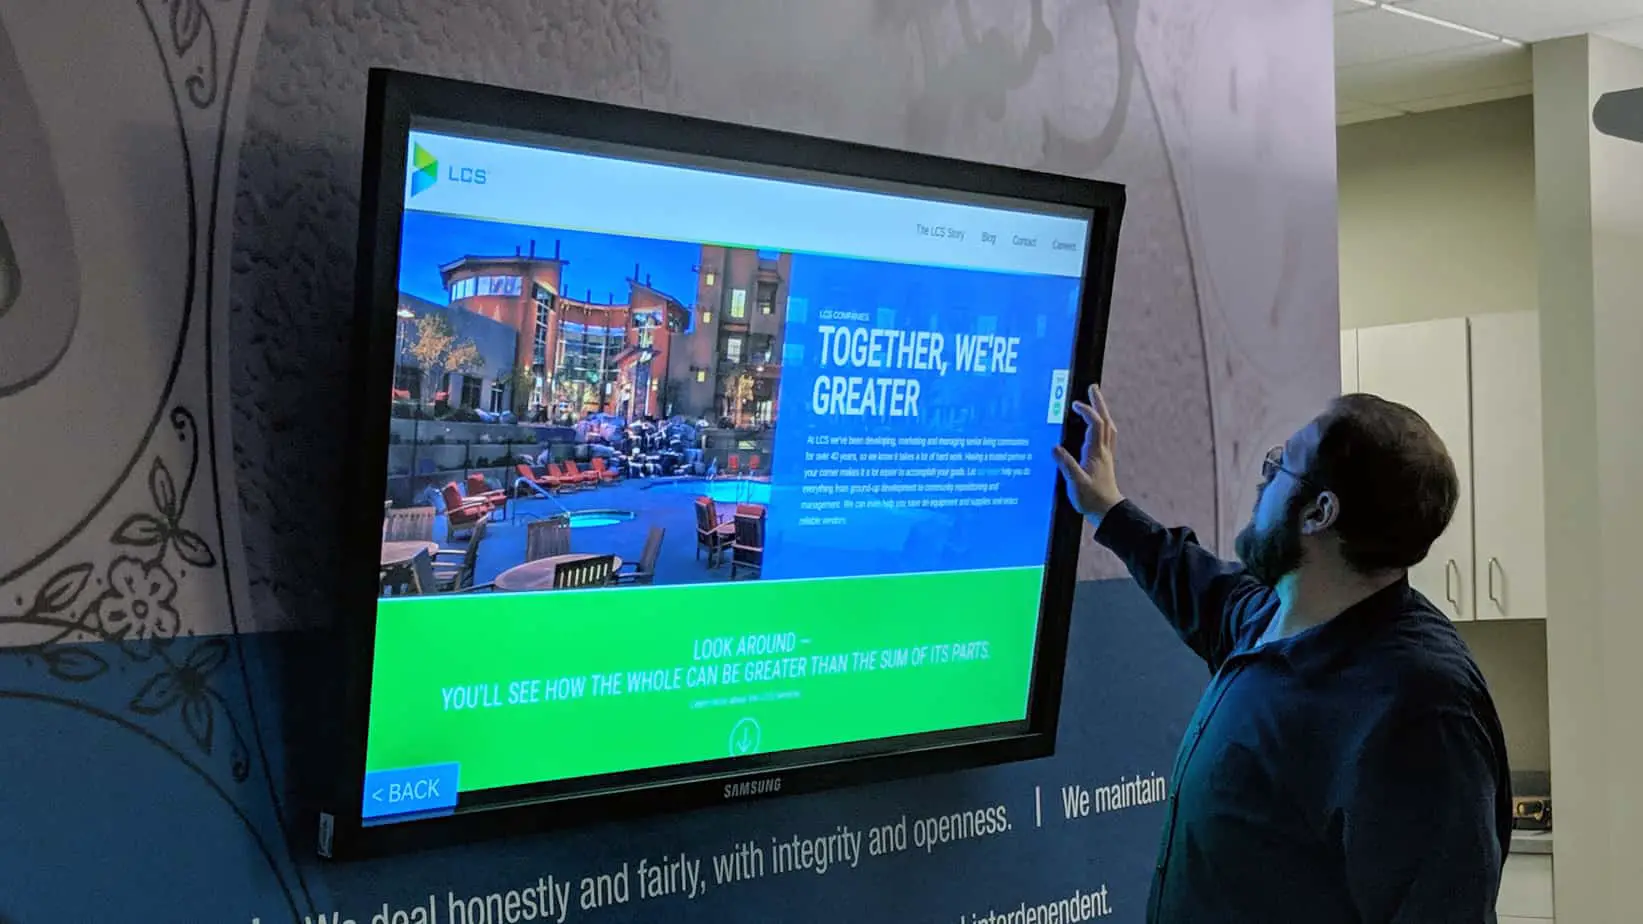 The 45 Best Types of Digital Signage Content